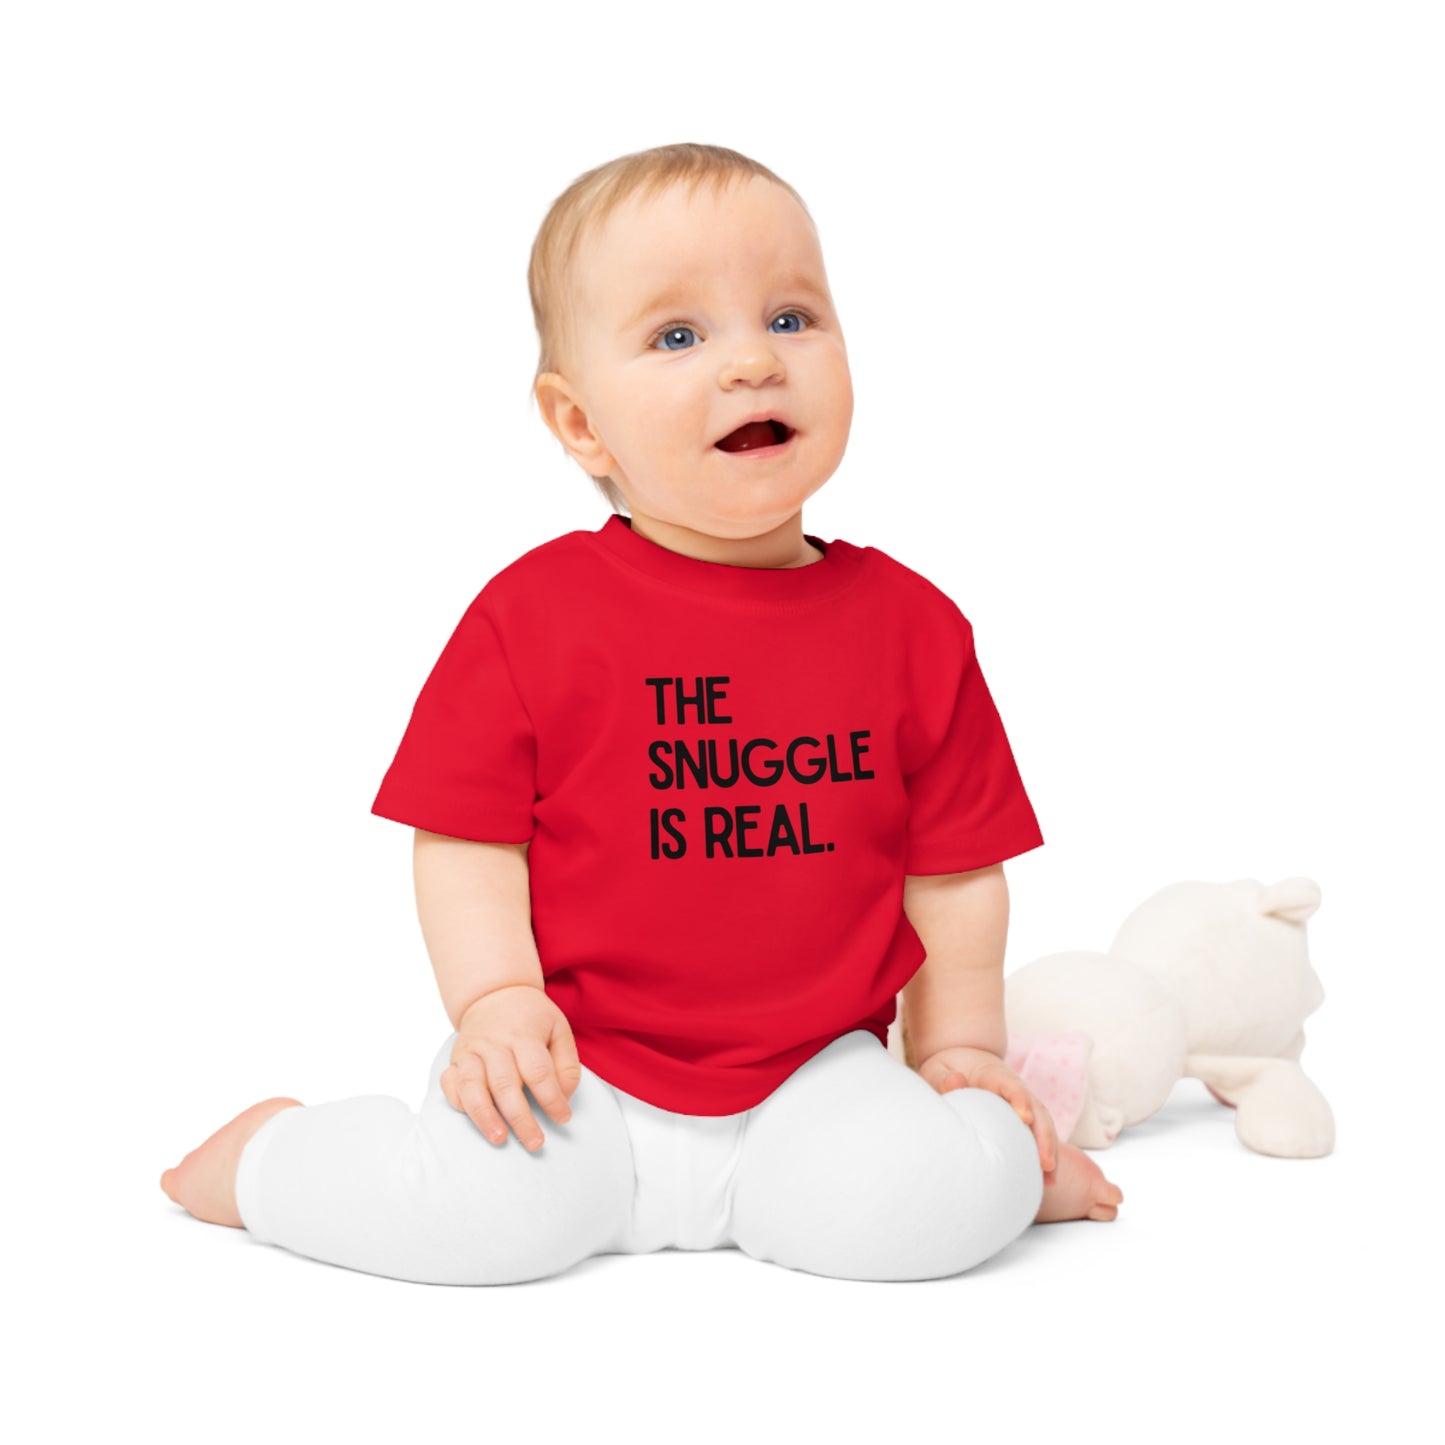 The snuggle is real - Baby T-Shirt